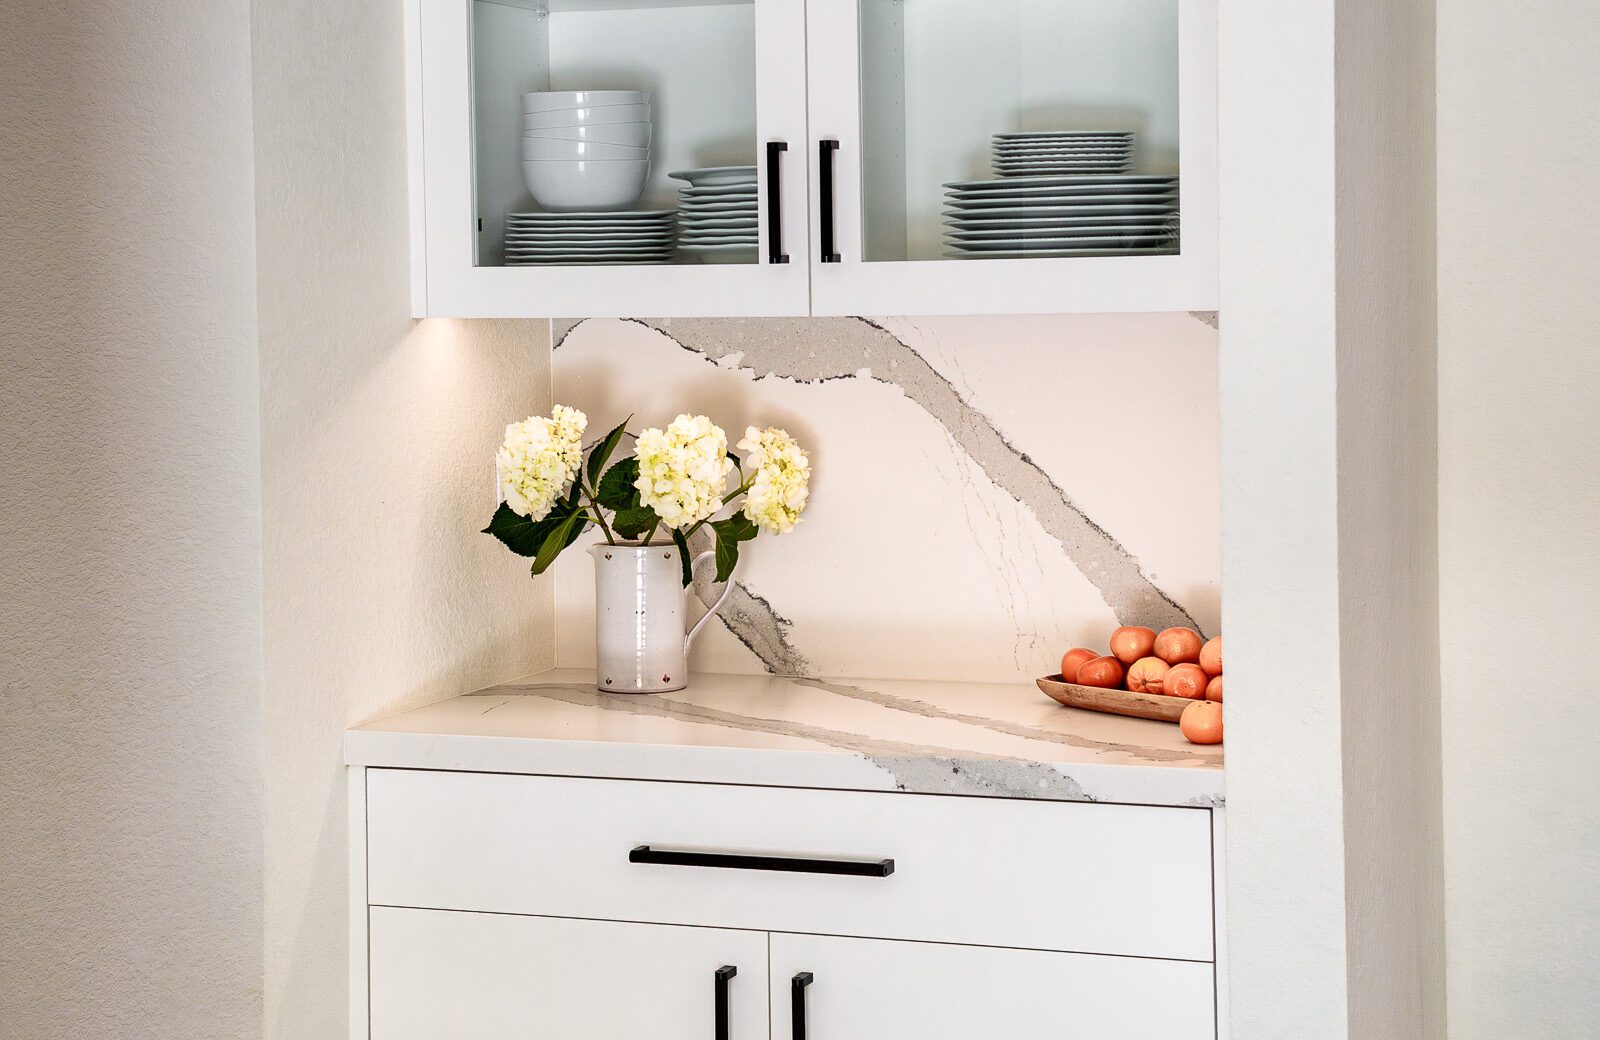 white painted Cystal cabinetry, glass doors, quartz countertops